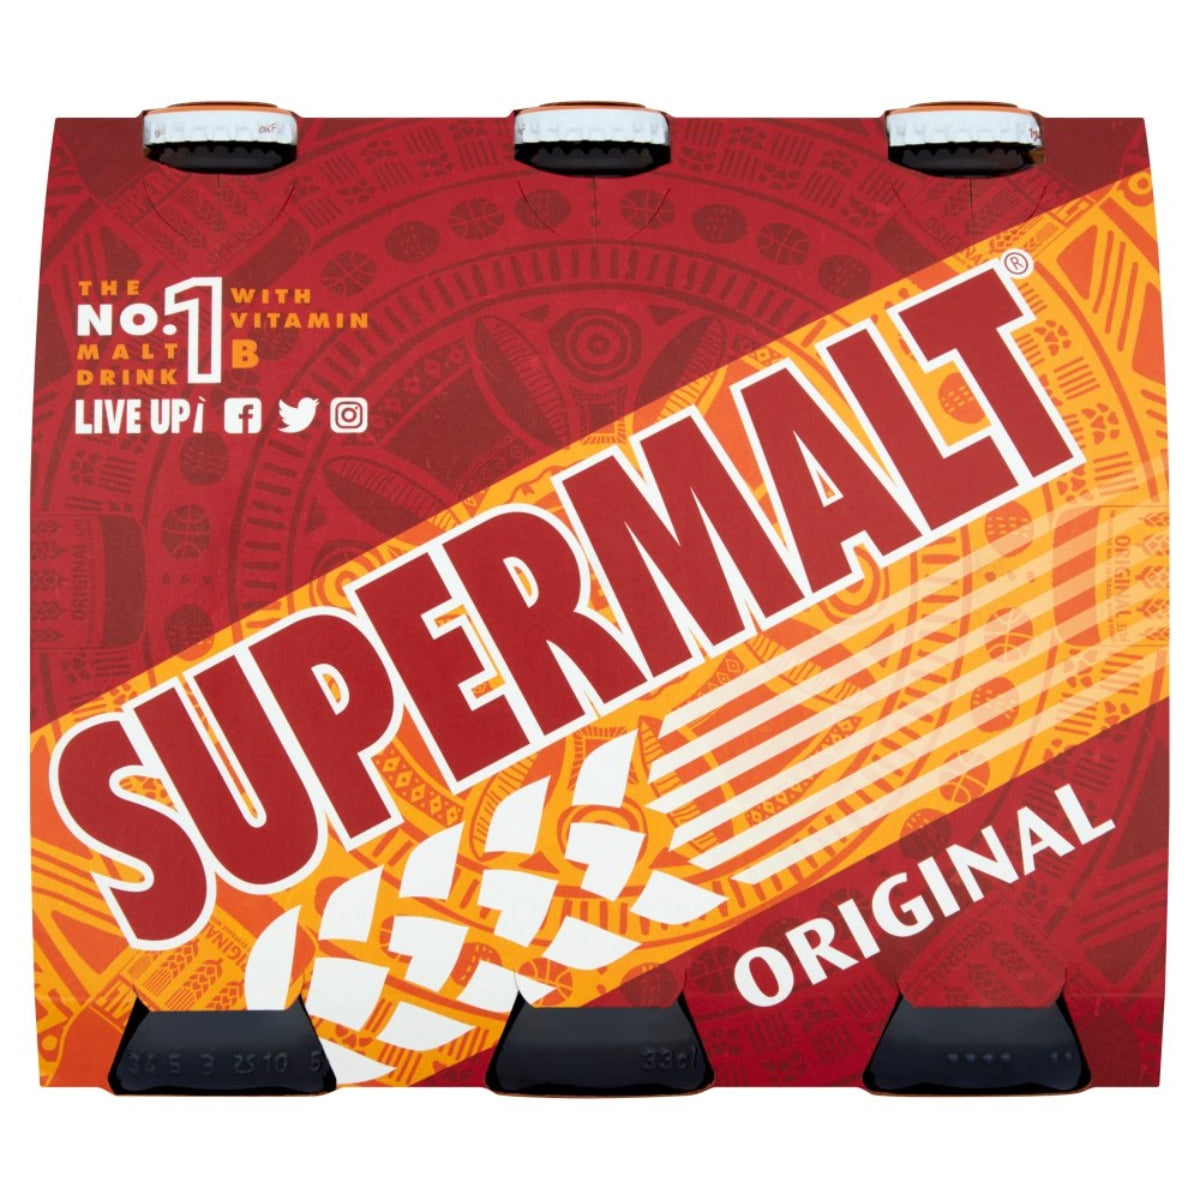 A Supermalt - Multipack - 6 x 330ml on a white background.